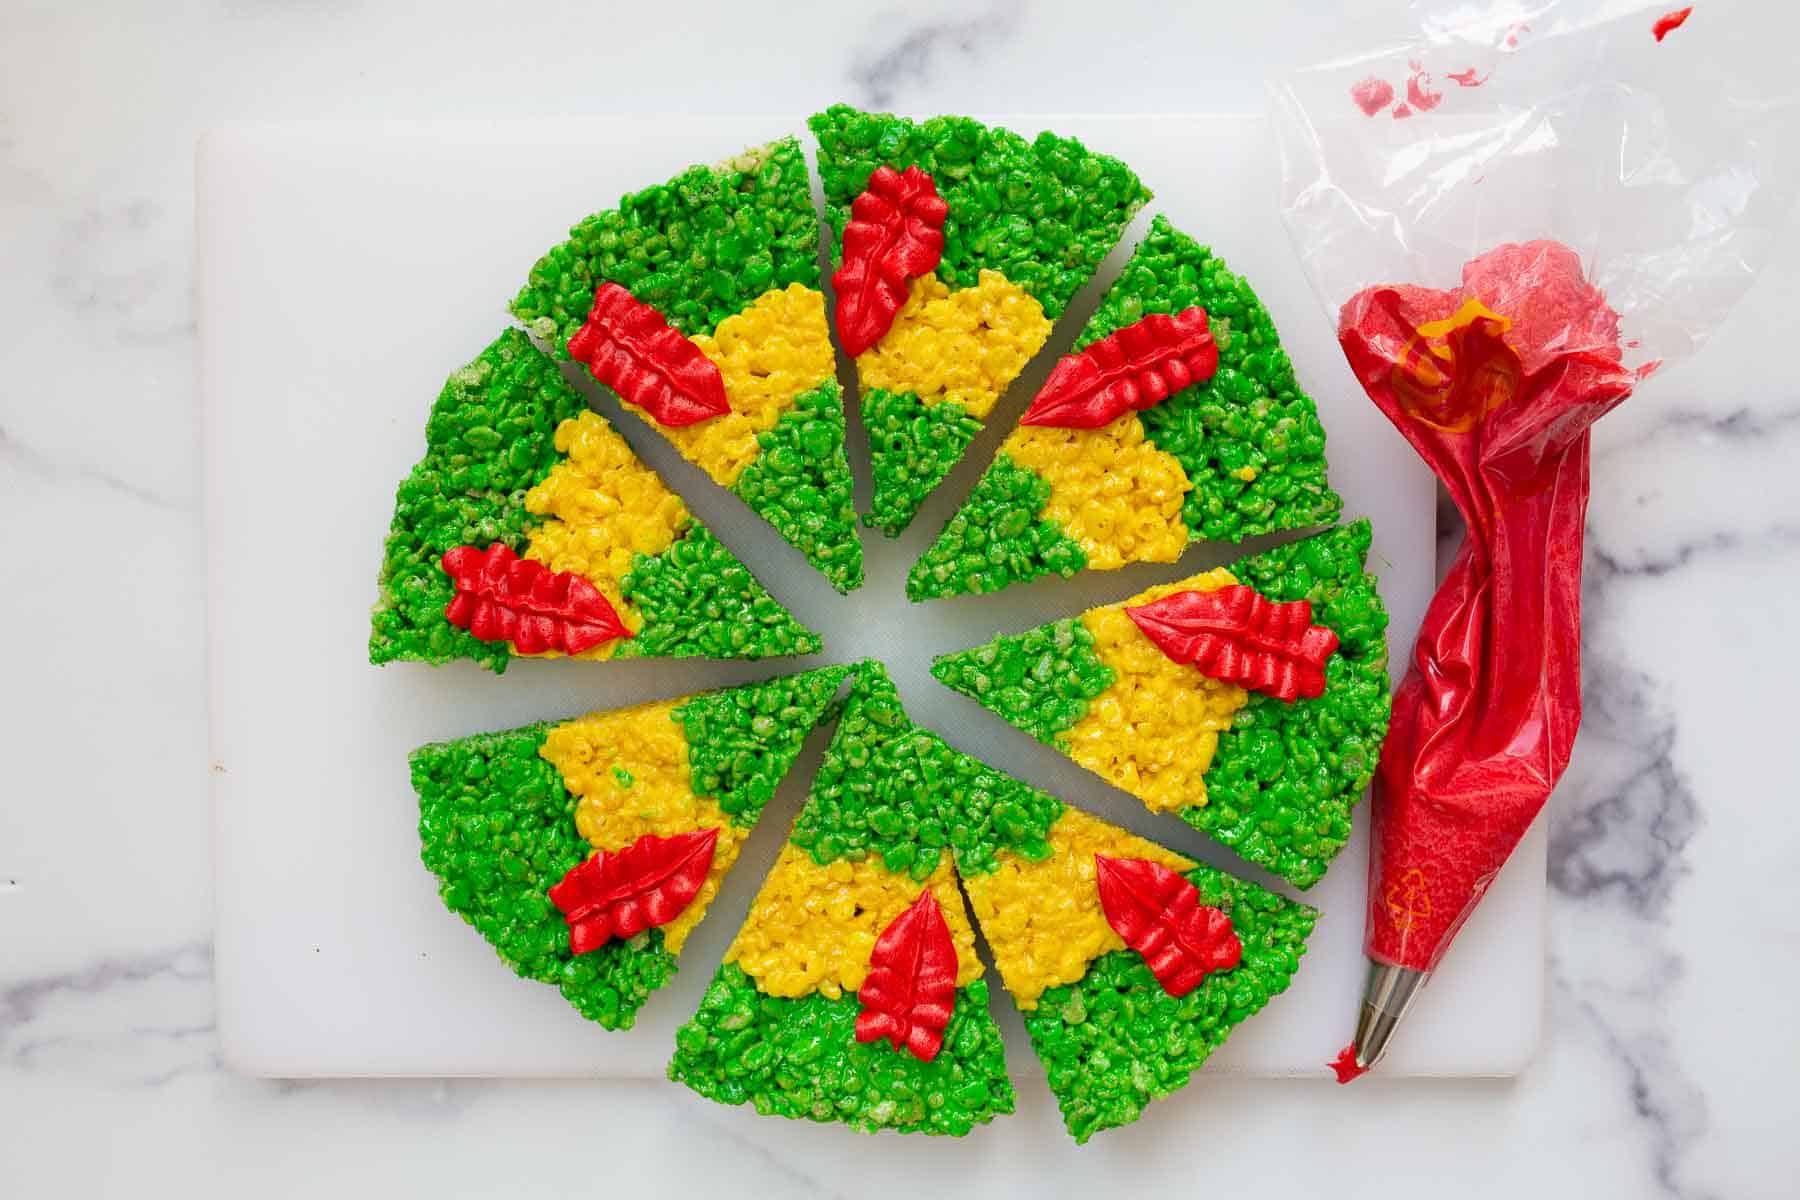 Red feathers piped on green and yellow triangle desserts.